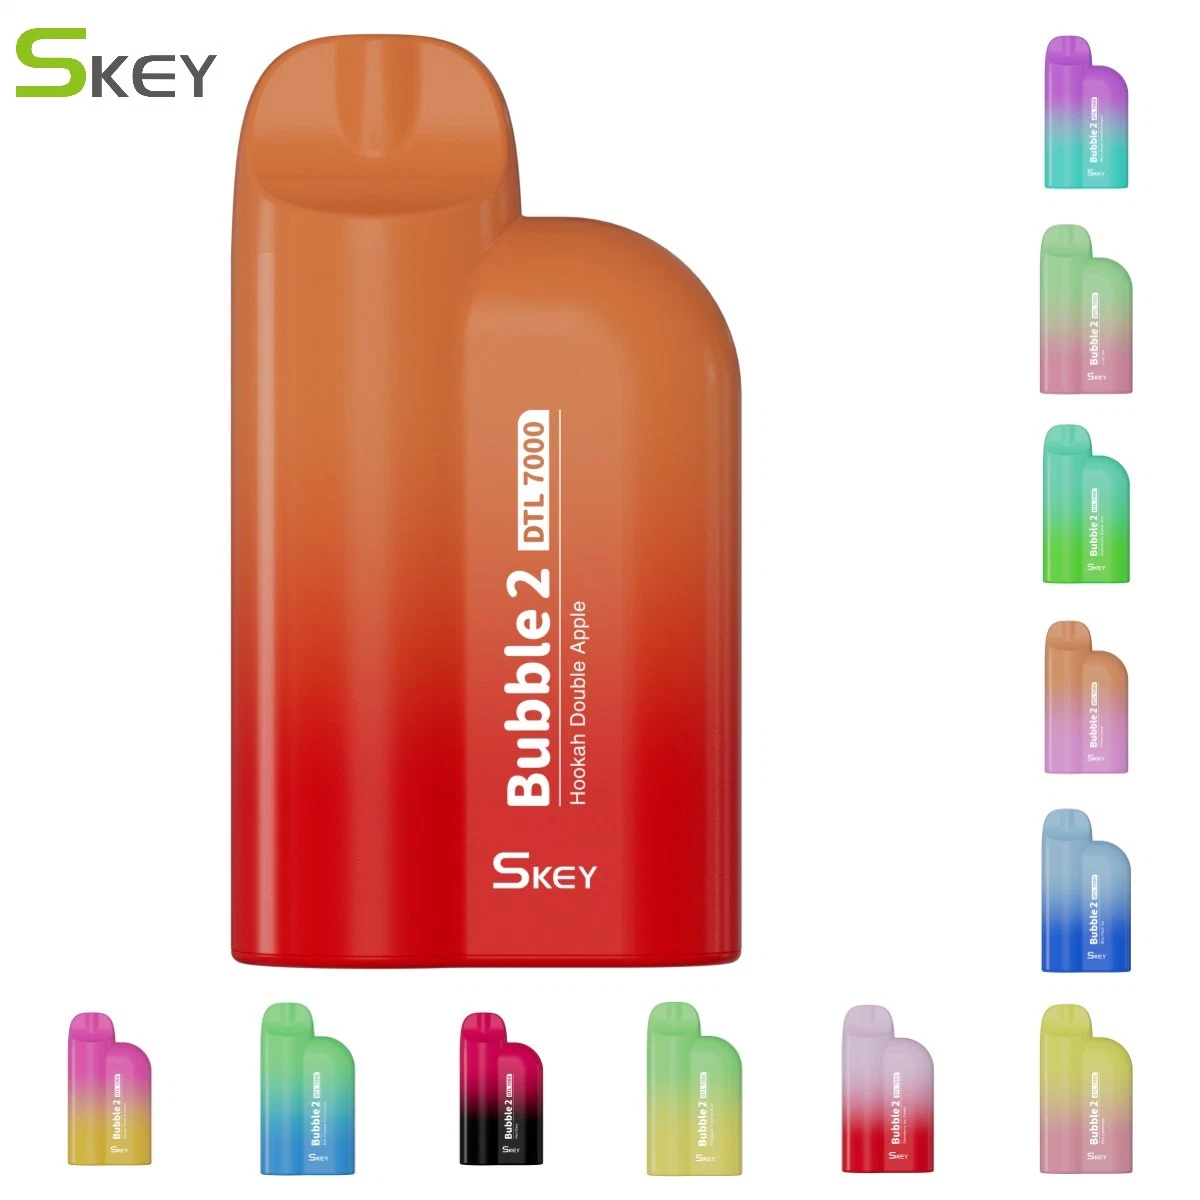 Skey Vape I Wholesale E-Cigarette Hookah Disposable Bubble2 Rdl Vaping 7000puffs Rechargeable Airflow Adjustable with 15ml Disposable with Factory Direct Price